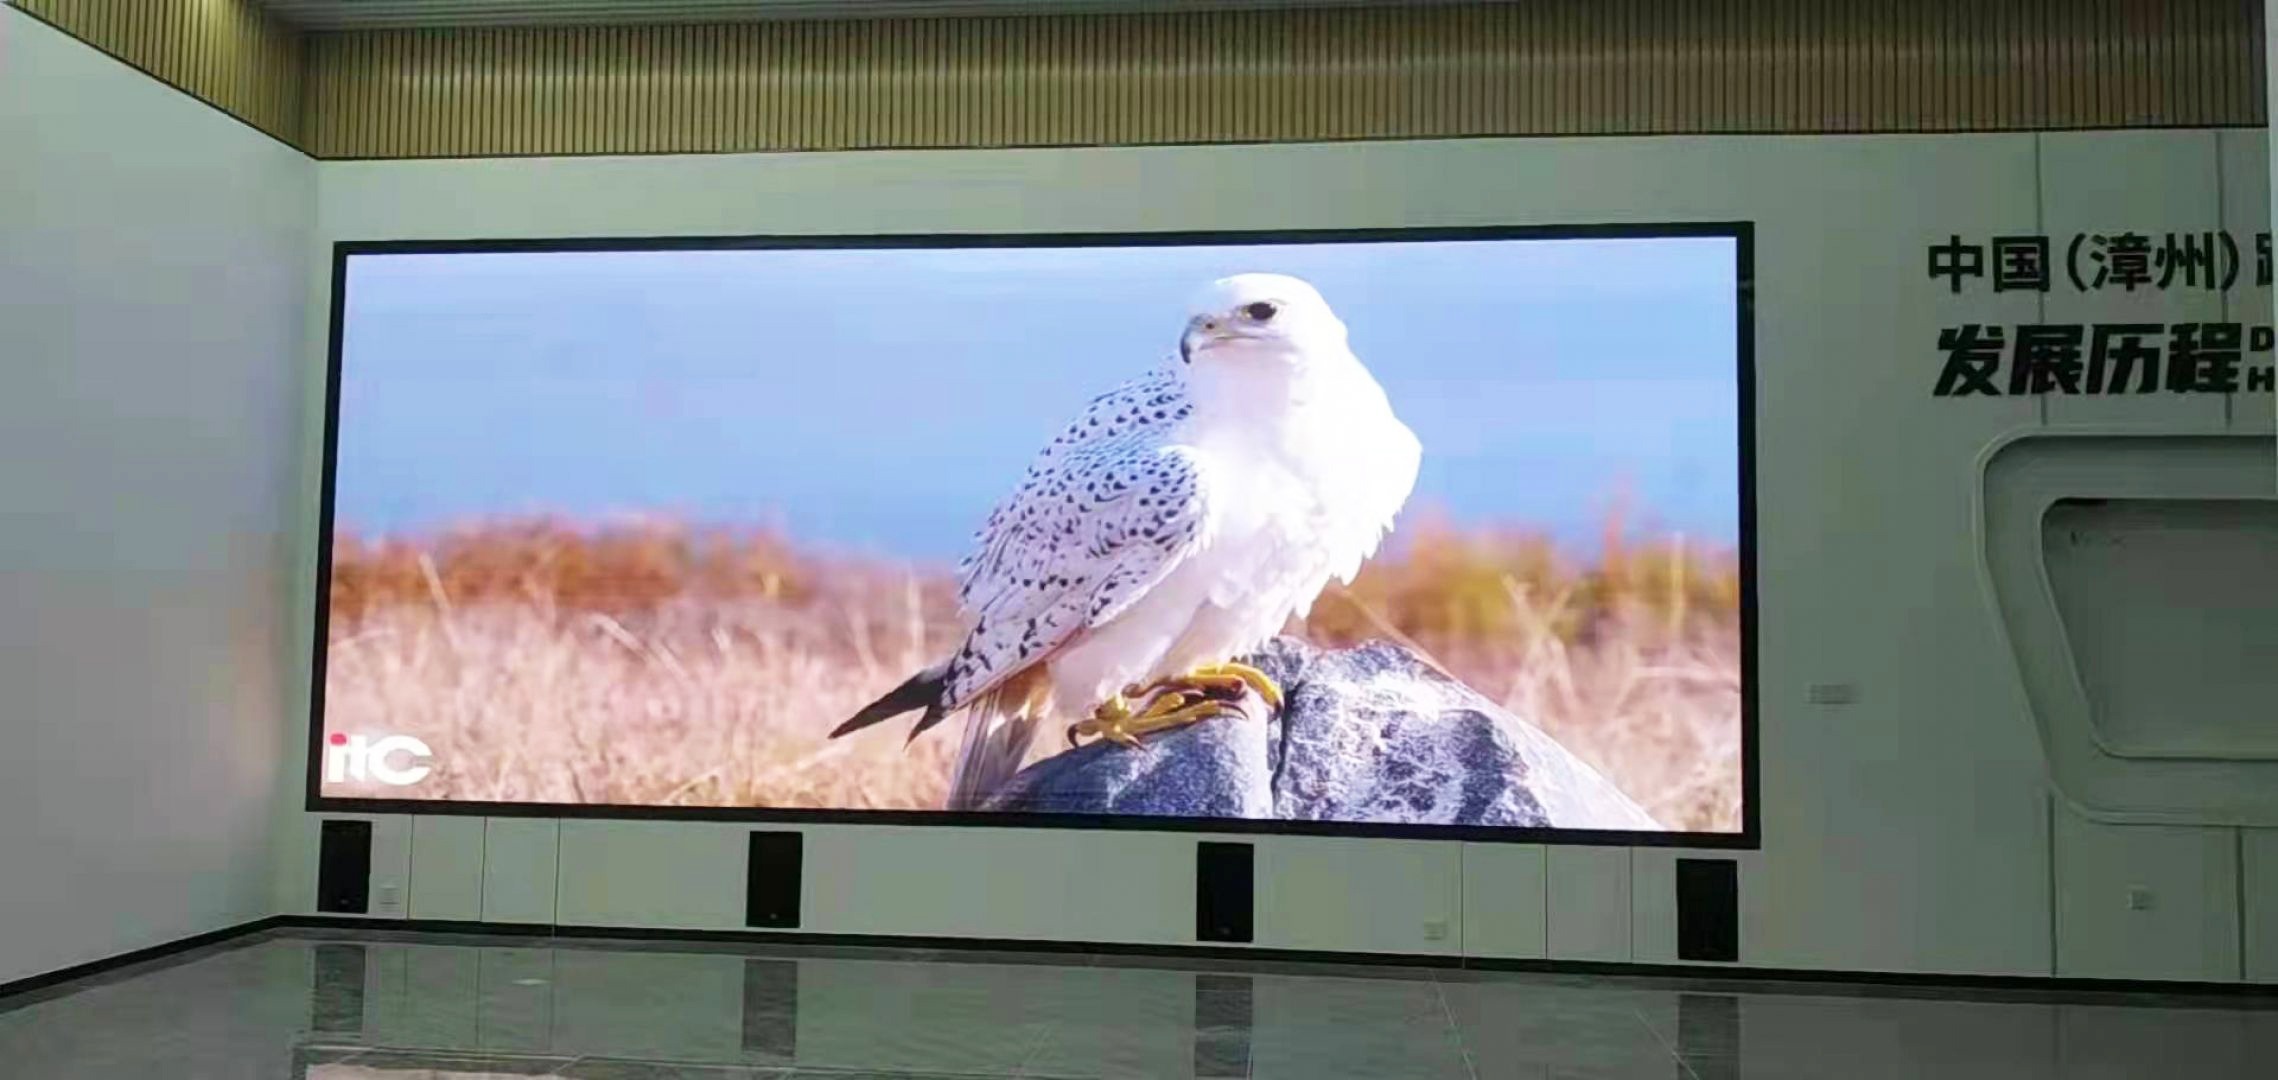 Why are LED conference screens becoming more and more popular in the market?